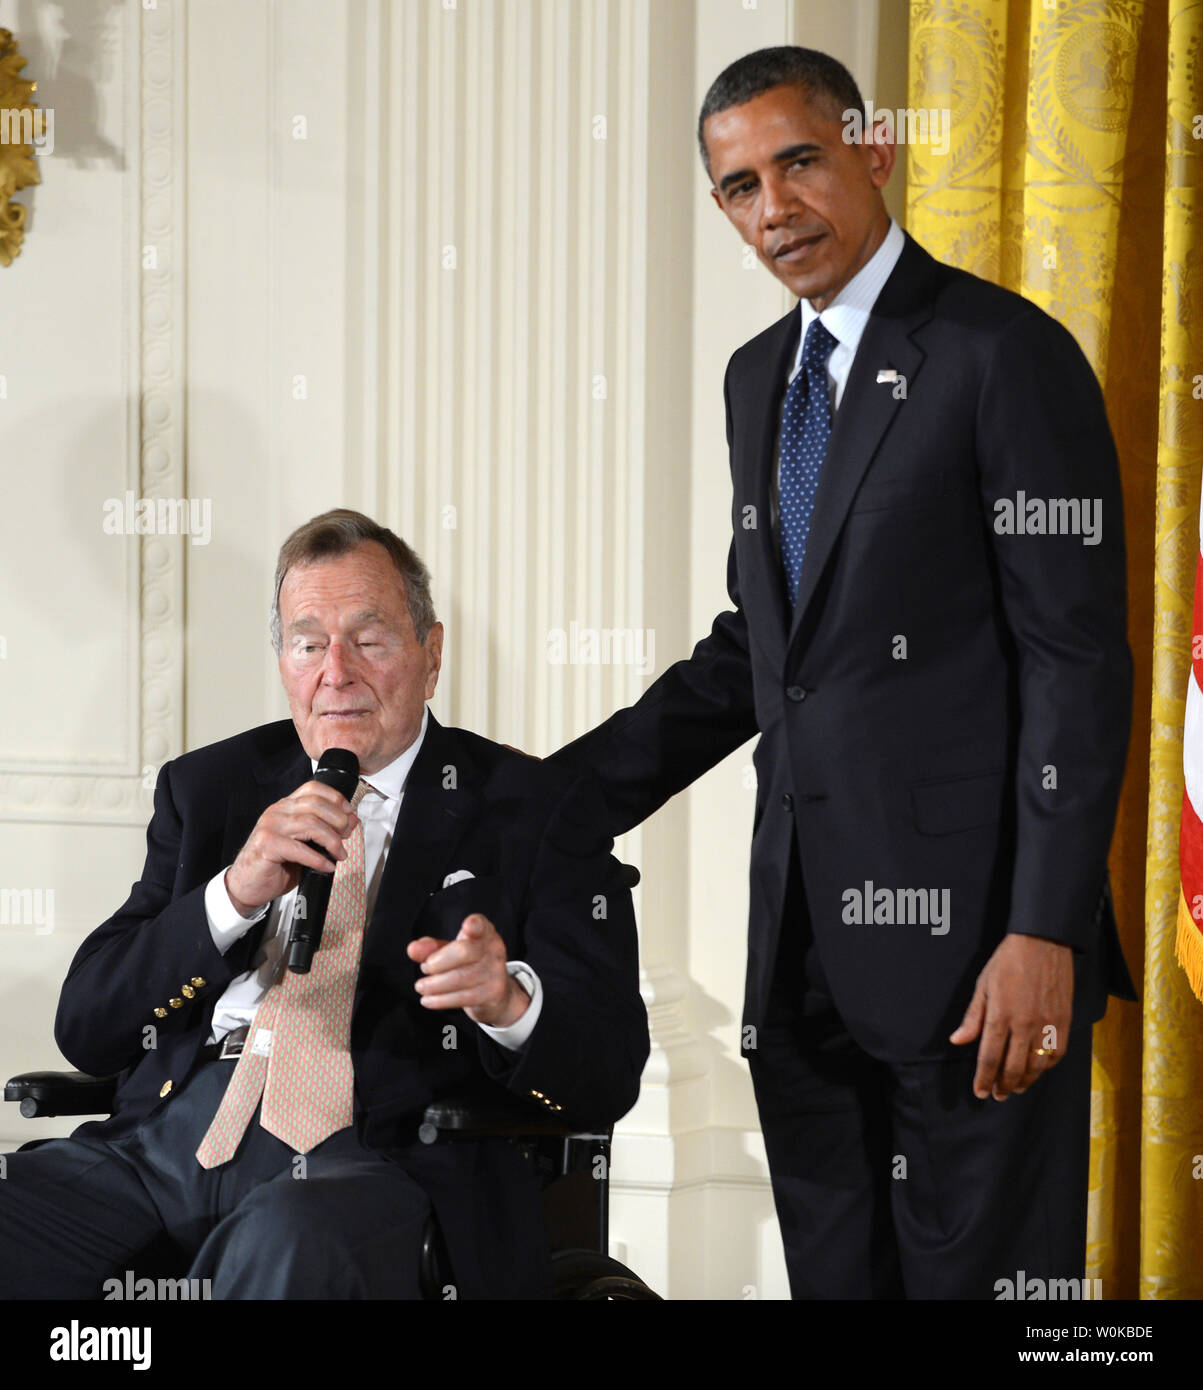 In this file photo, former President George H.W. Bush makes some brief remarks during the presentation of the 5,000th 'Points of Light' Foundation award with President Barack Obama in the East Room of the White House in Washington, DC on July 15, 2013.  George Herbert Walker Bush died November 30, 2018 at the age of 94 years.    UPI/Pat Benic Stock Photo